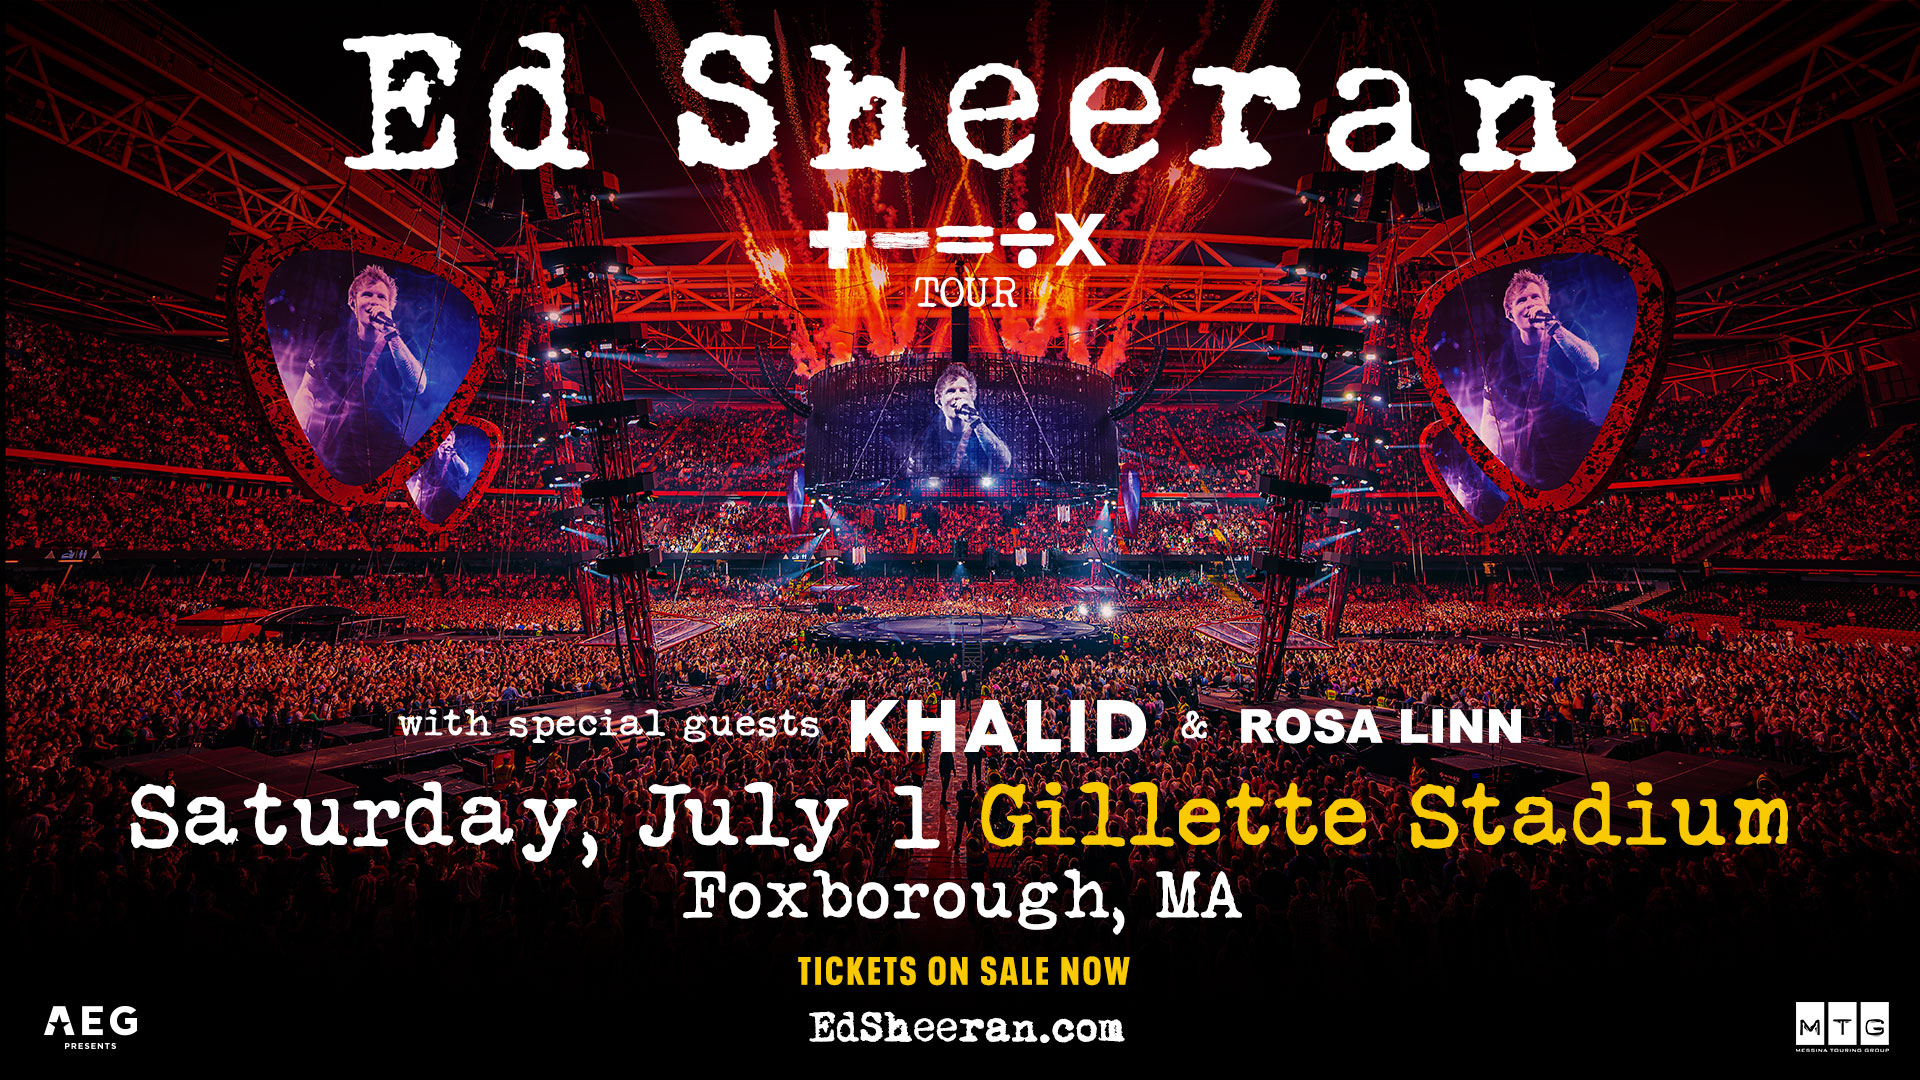 Win Tickets to See Ed Sheeran, Khalid on ‘The Mathematics Tour’ at Gillette Next Summer